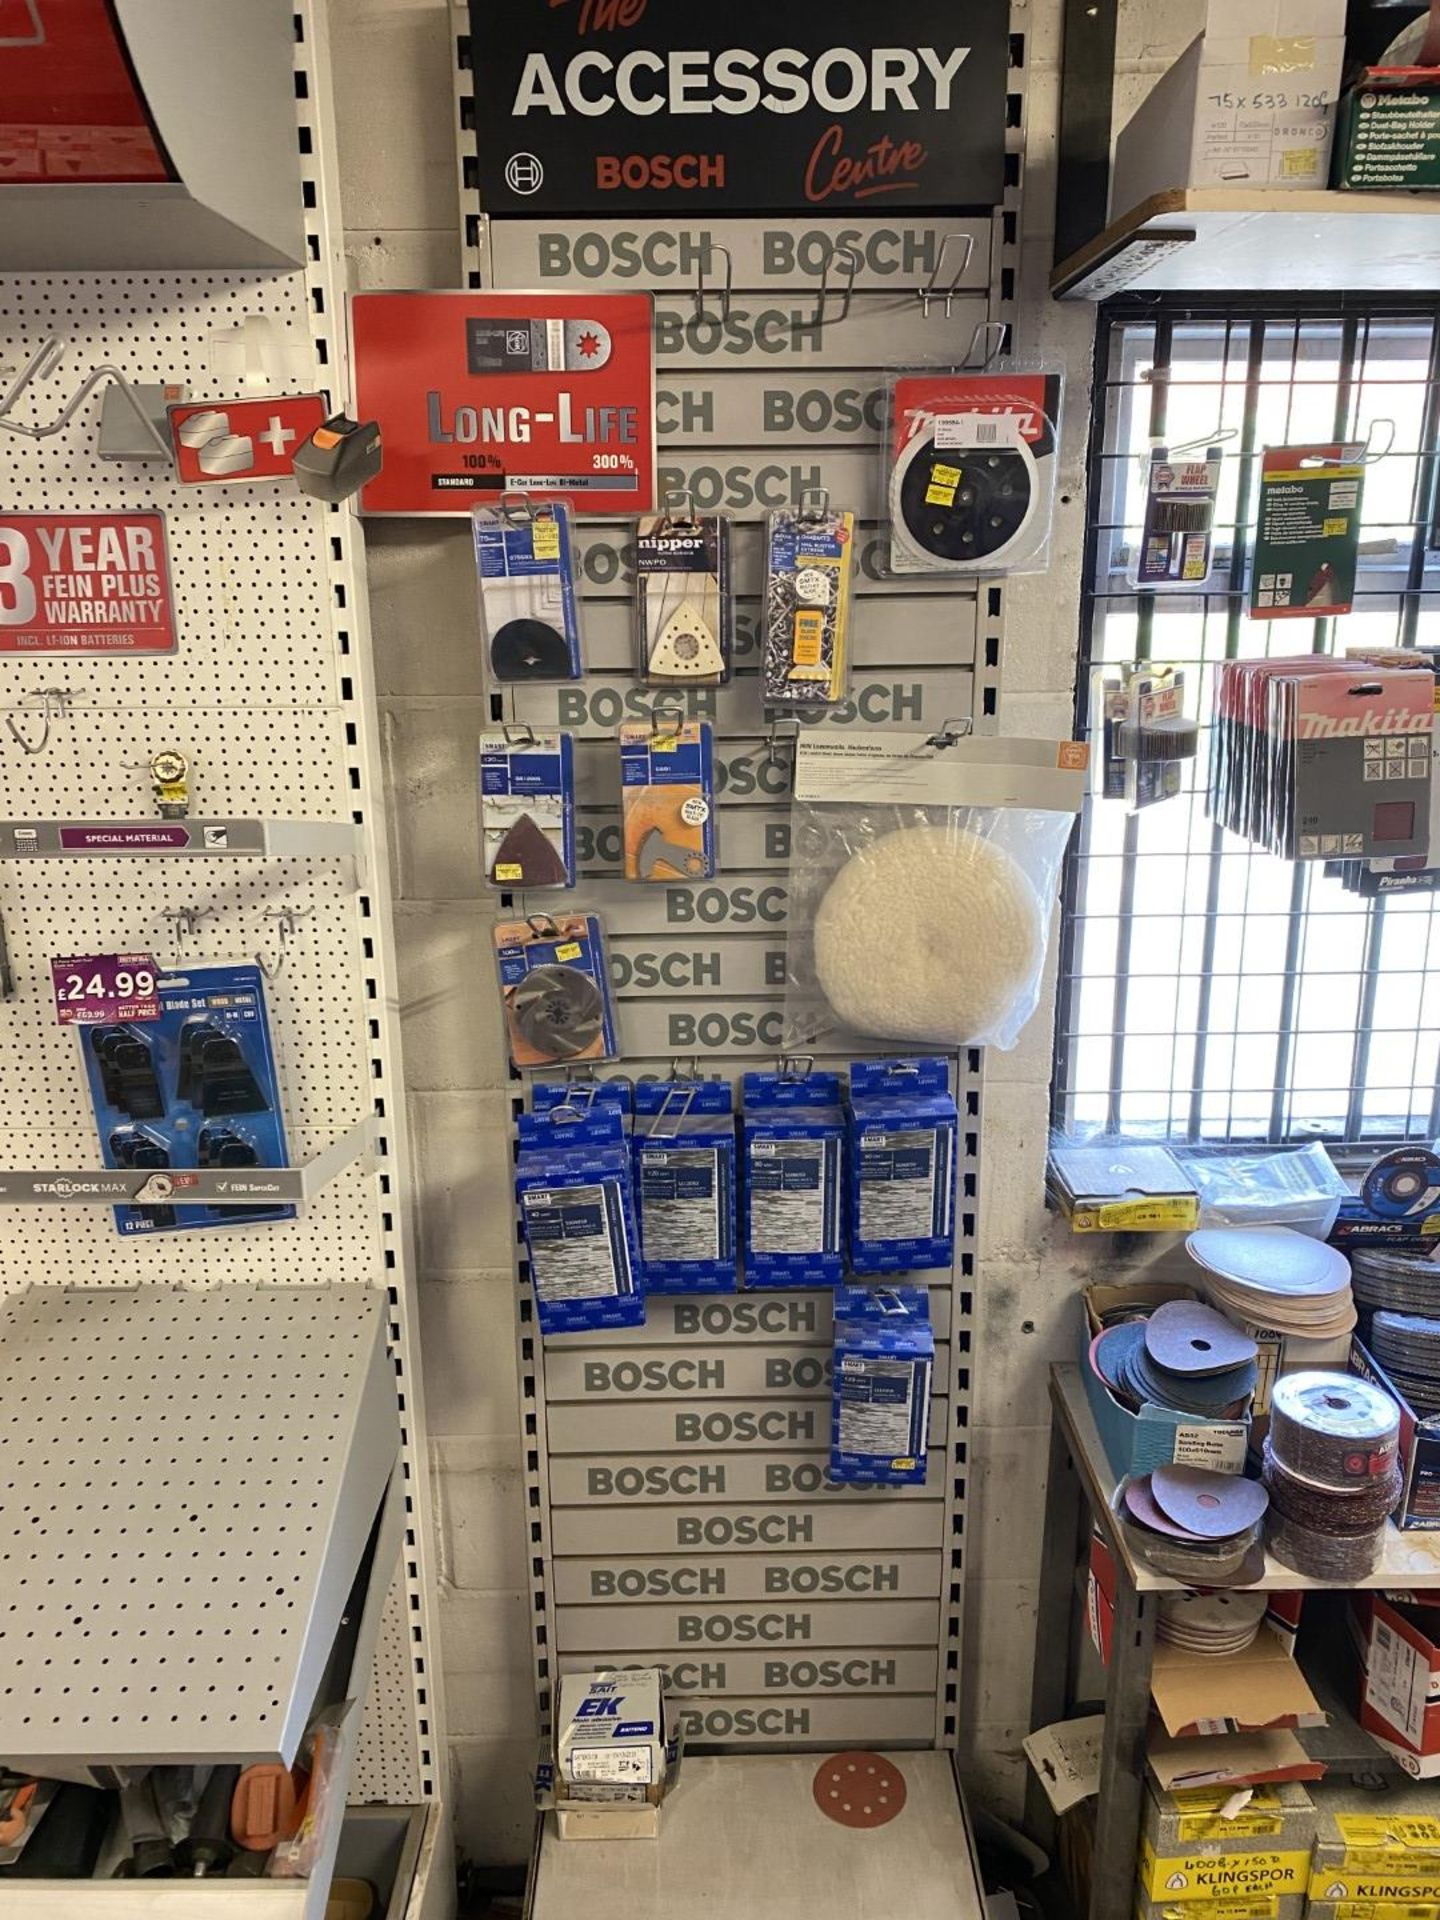 Accessory display and contents of sand paper and parts